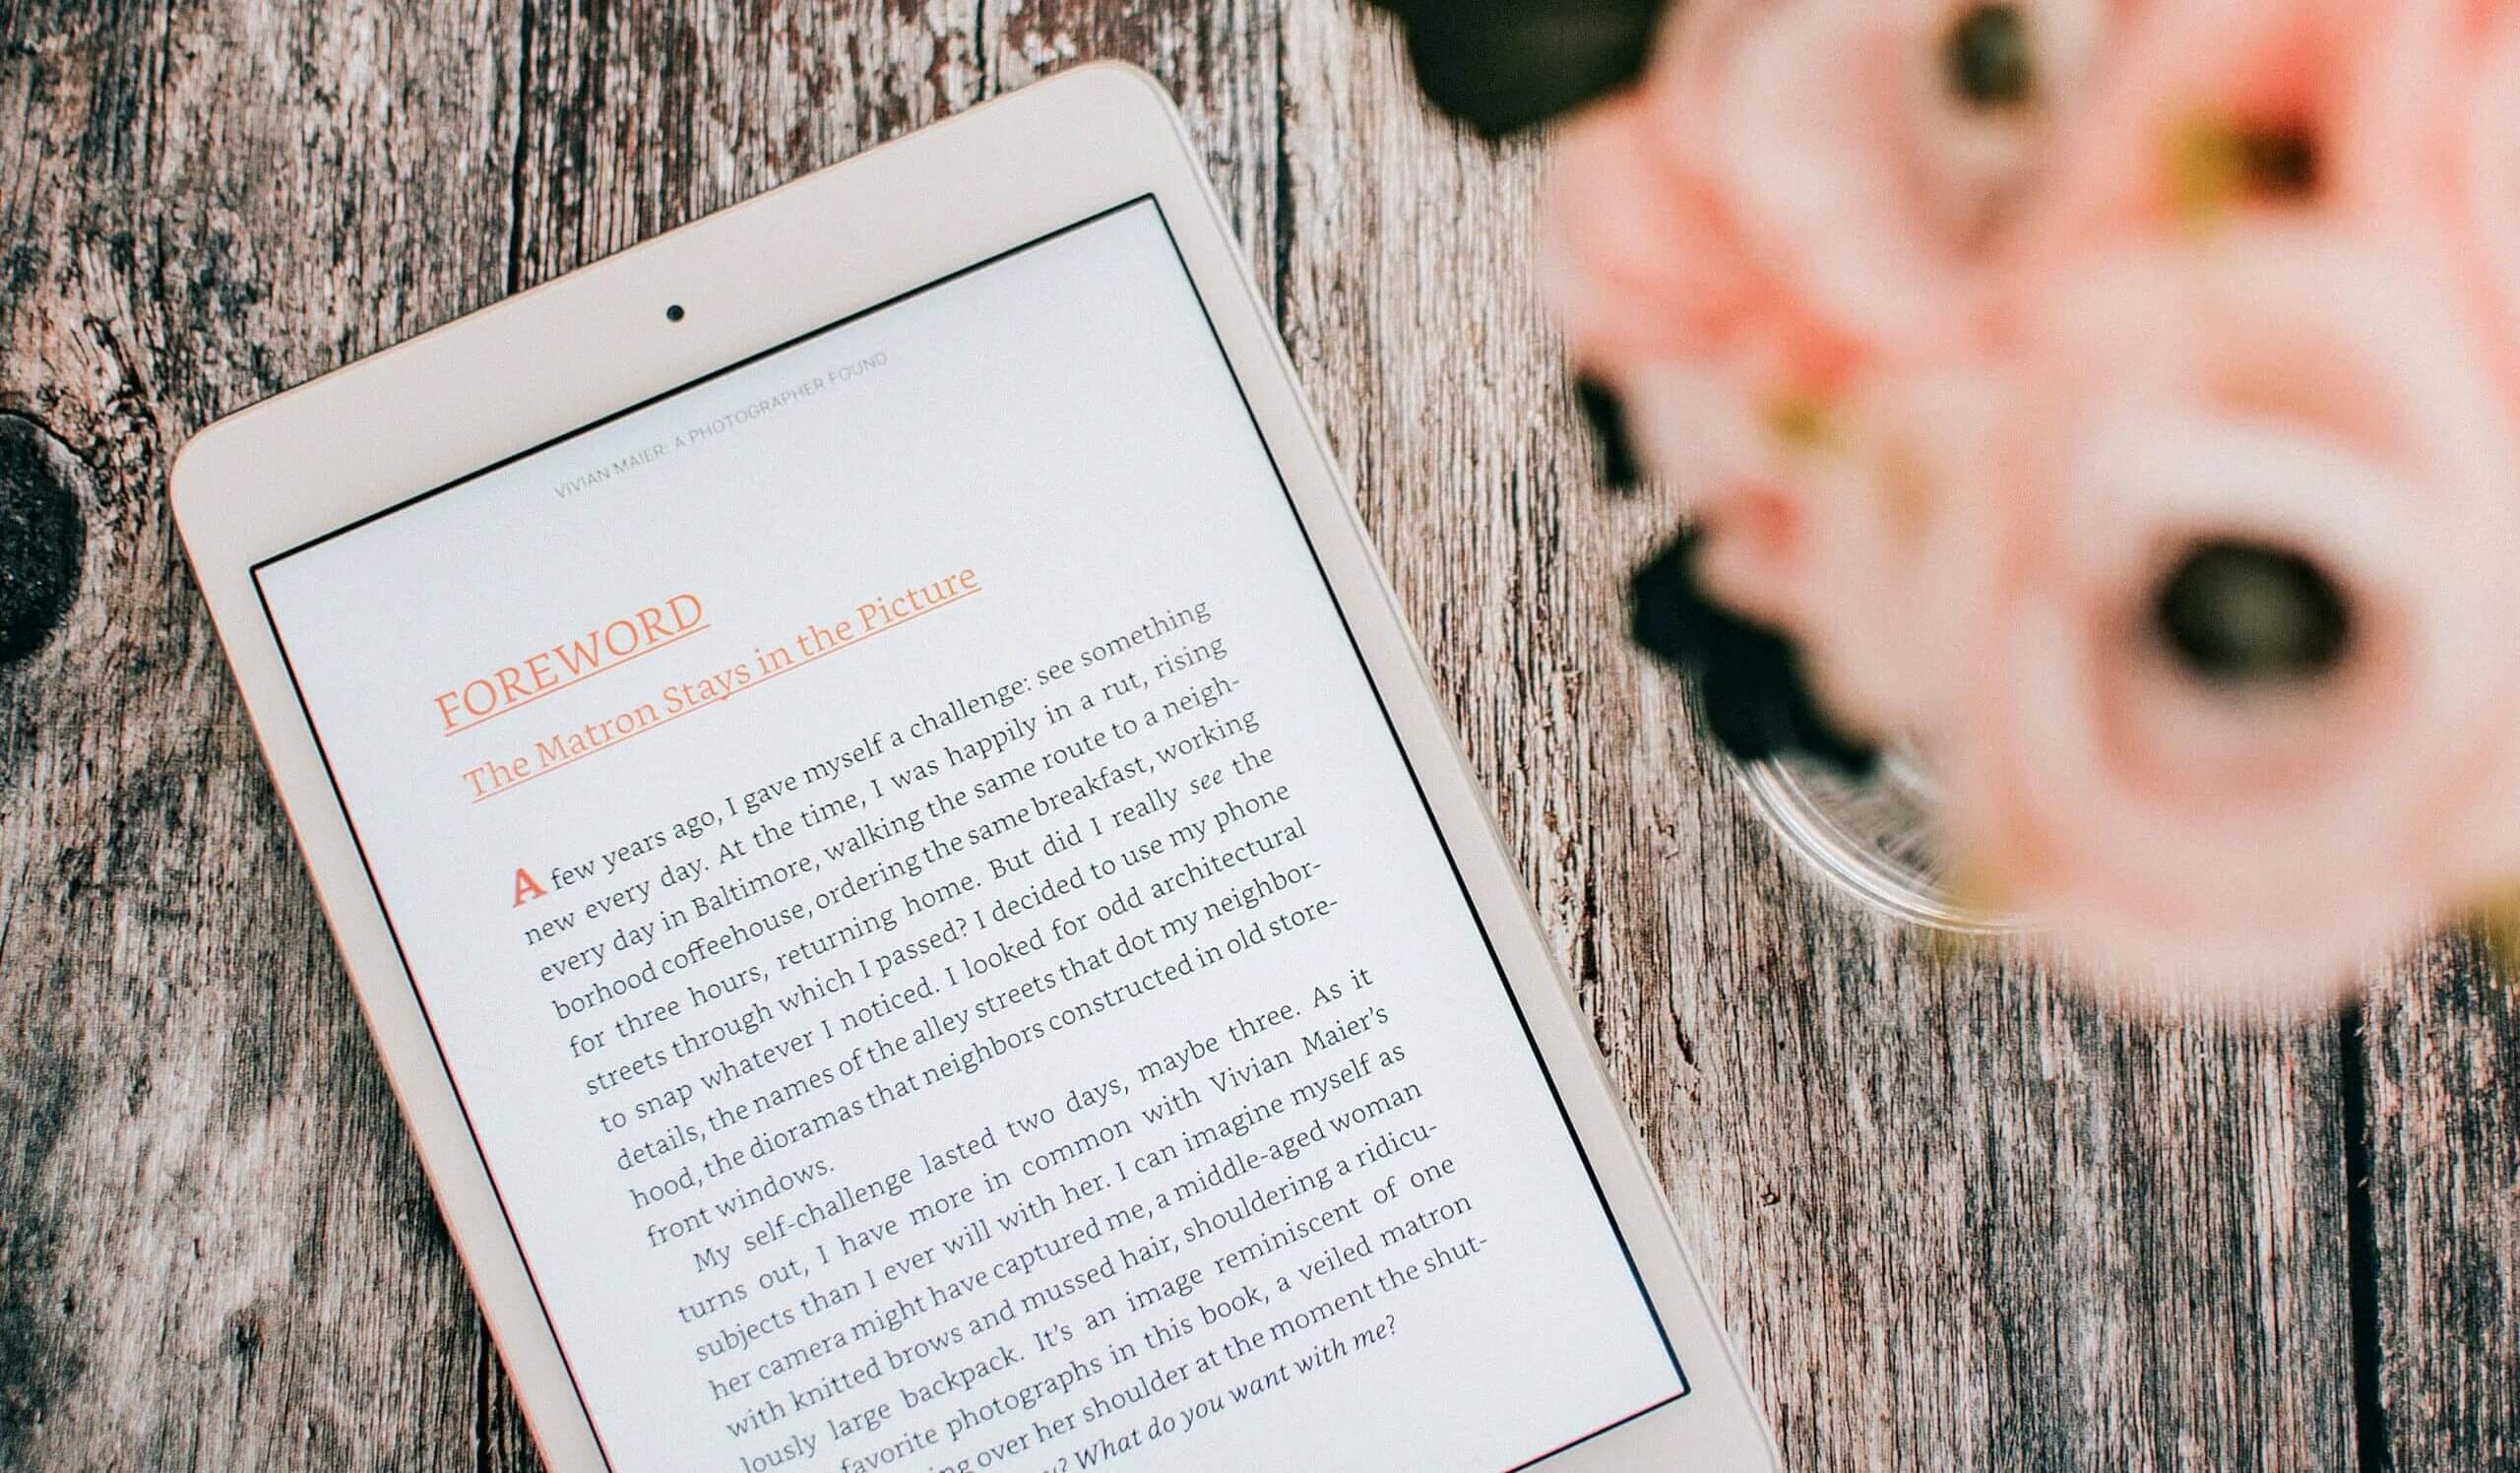 Amazon is increasing the cost to Kindle Unlimited Good eReader